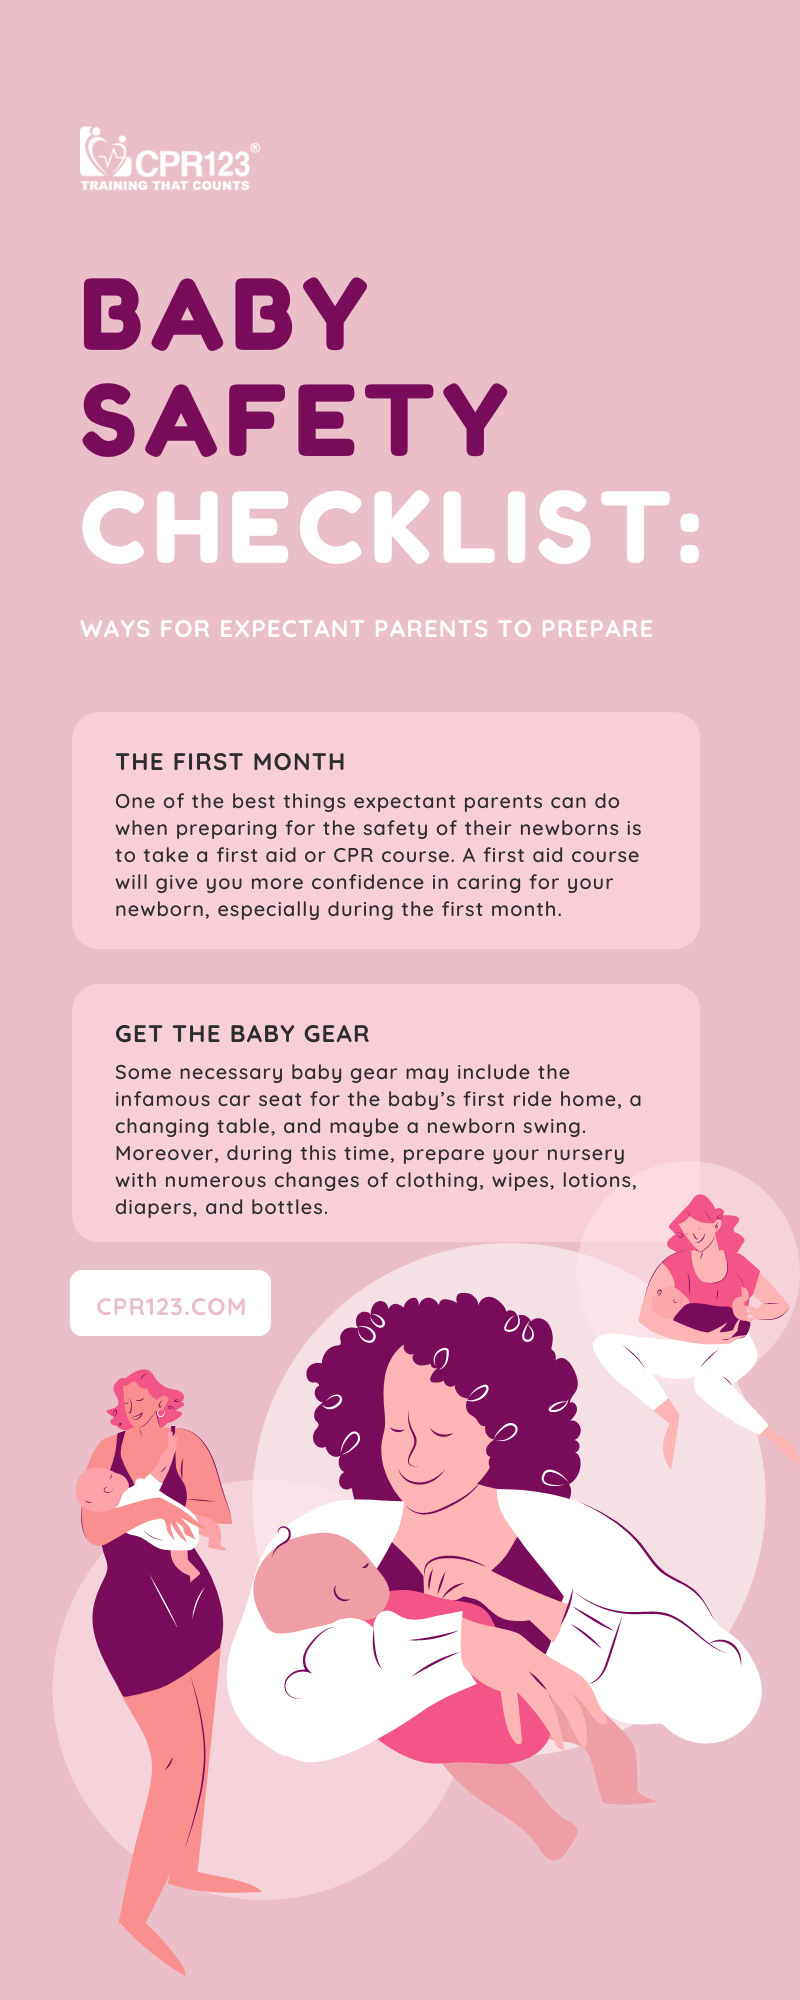 Baby Safety Checklist: Ways for Expectant Parents To Prepare